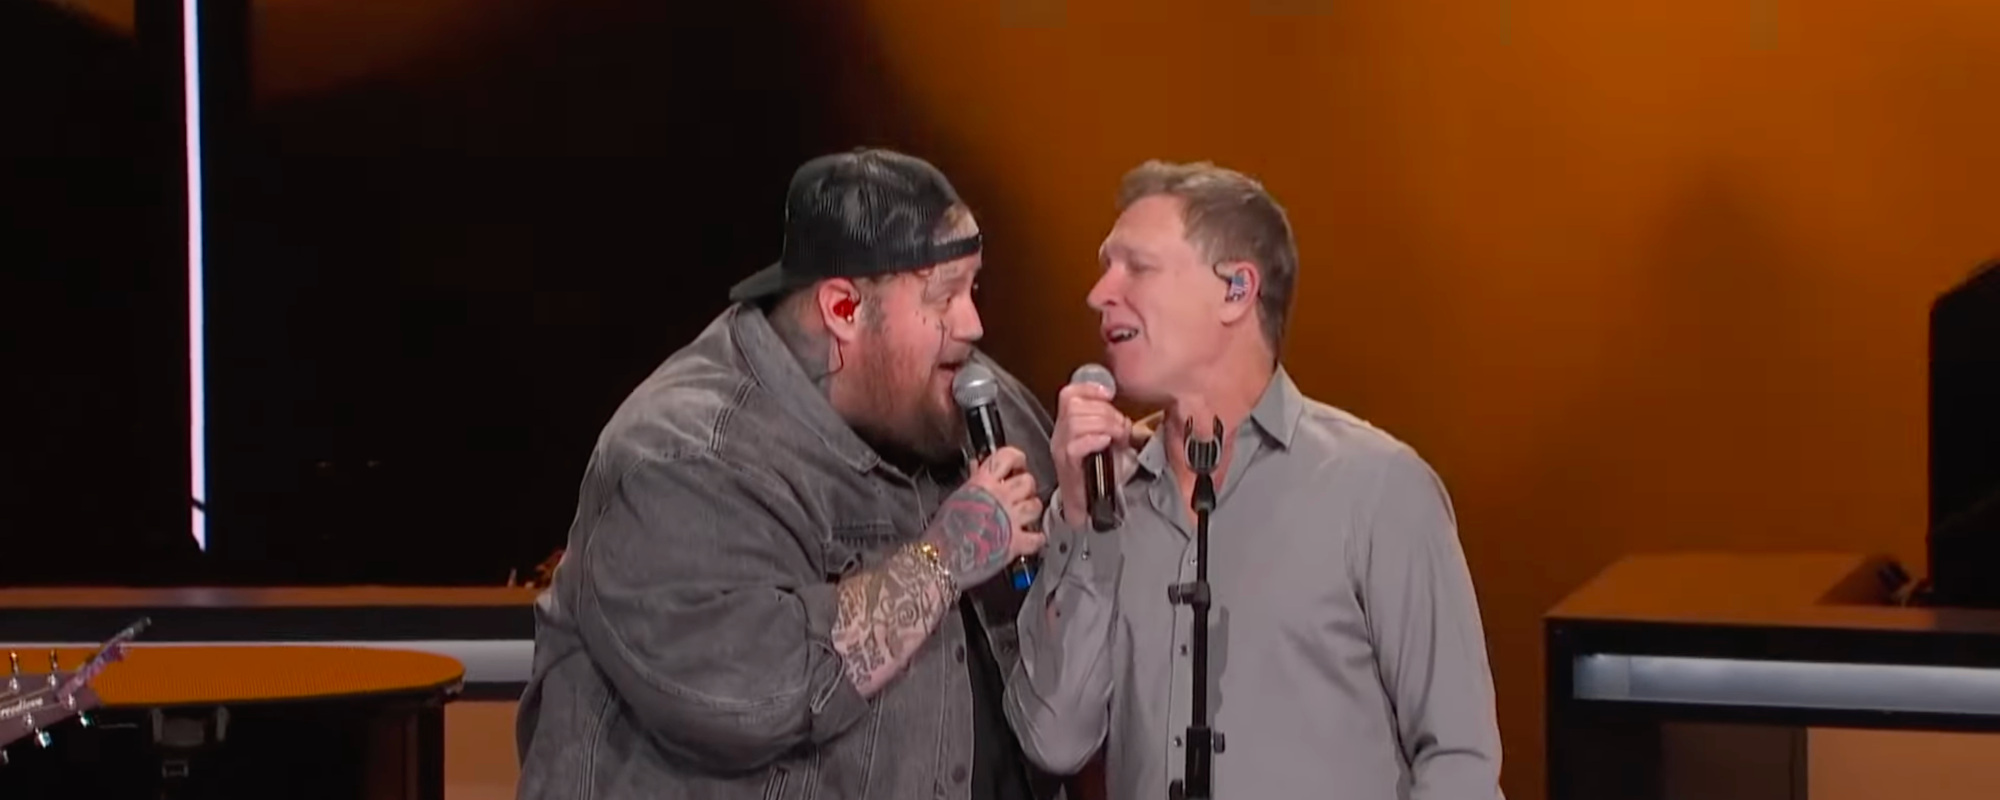 Watch: Craig Morgan and Jelly Roll Help Kelly Clarkson Celebrate Veterans Day with a Touching Rendition of “Almost Home”